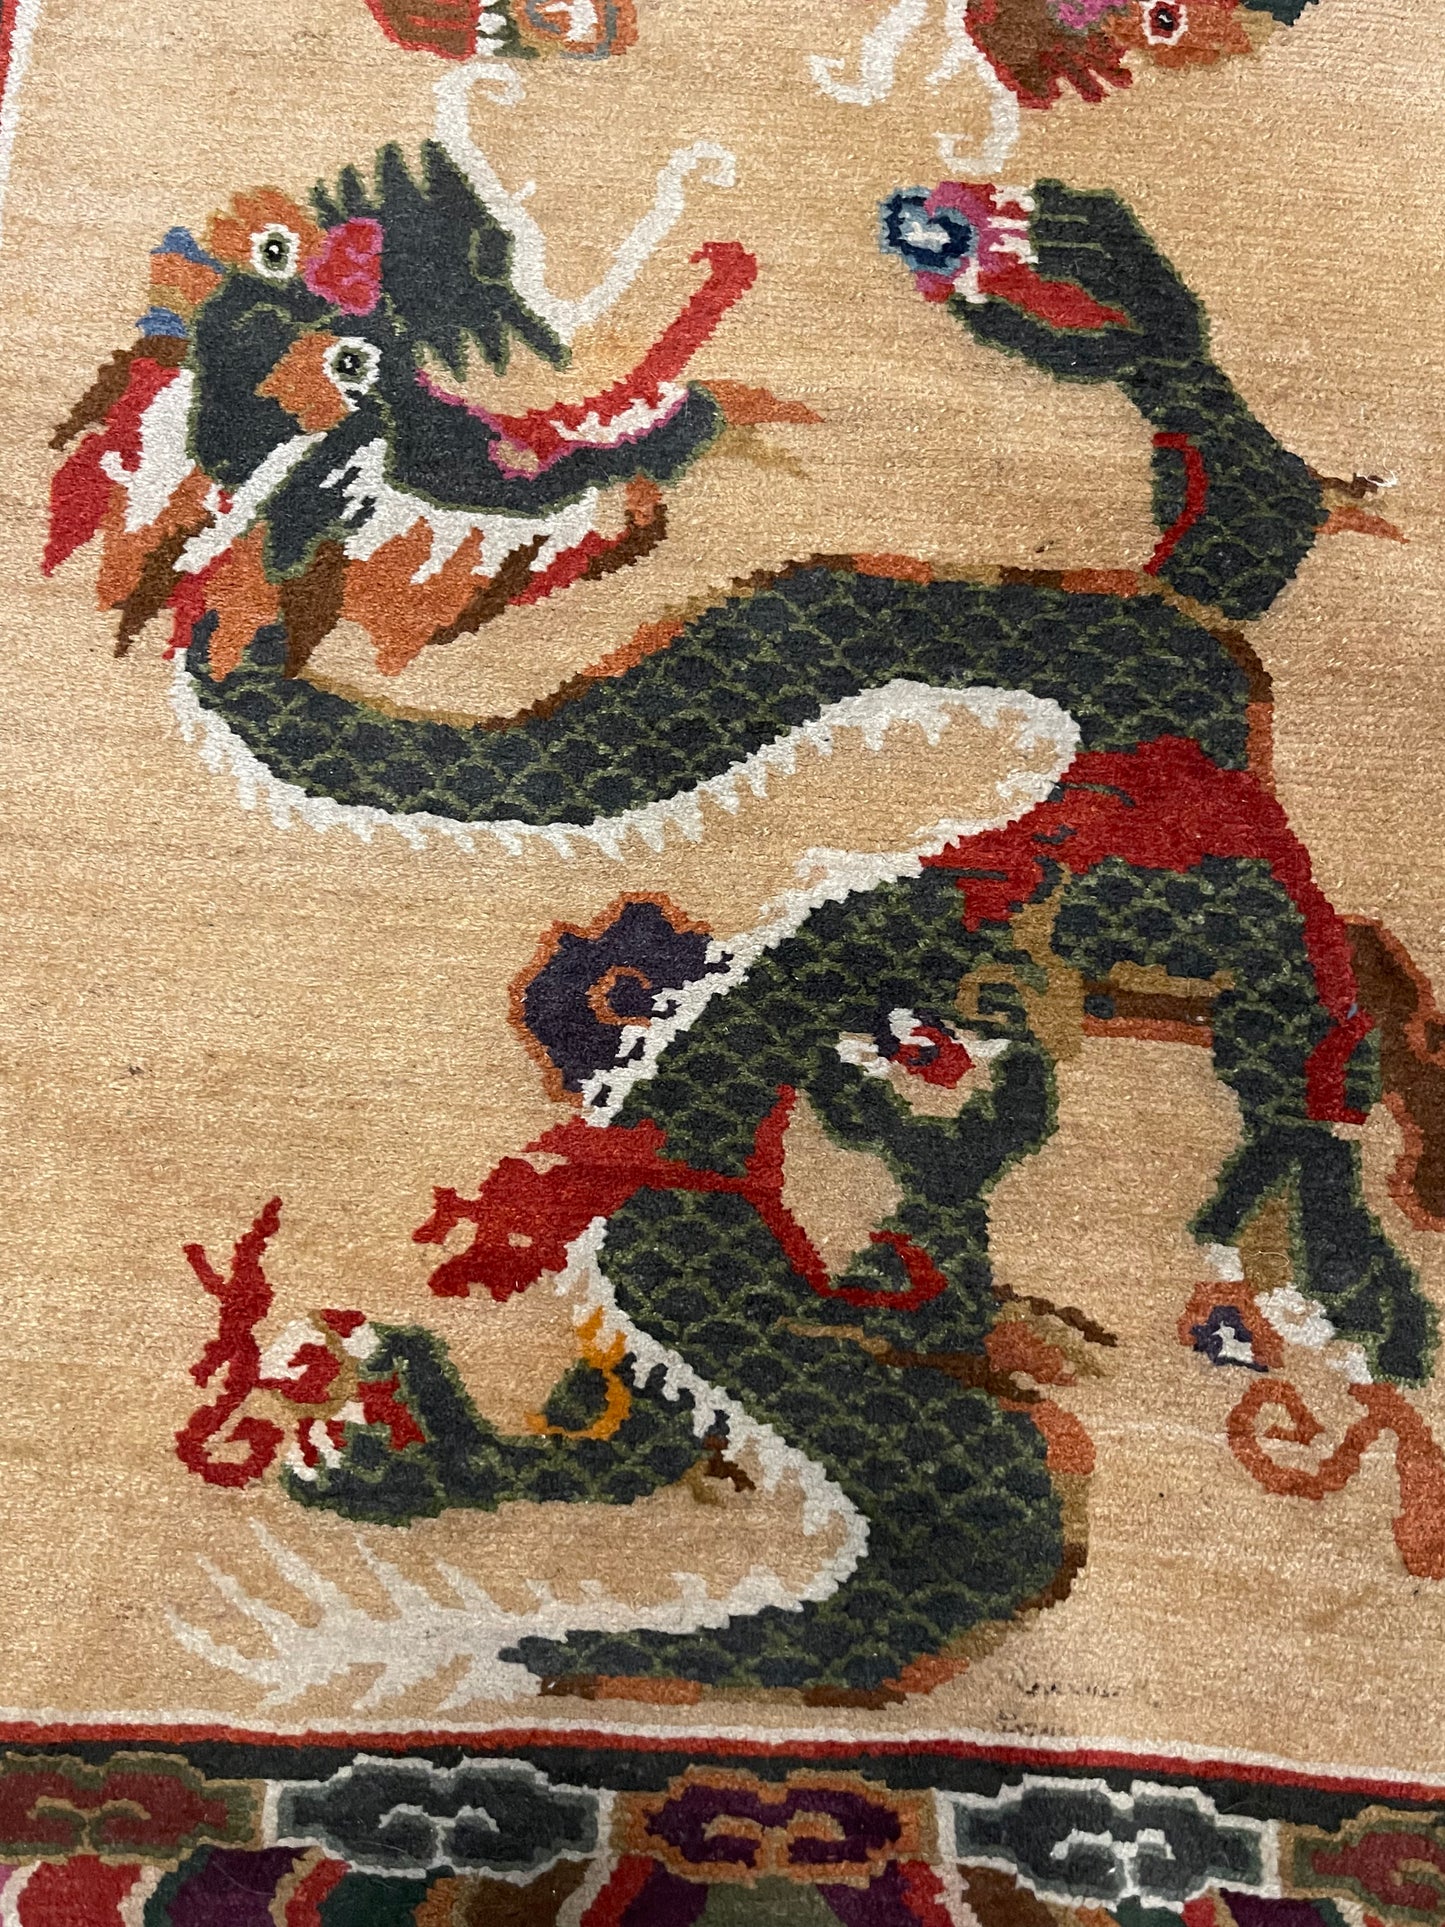 A vintage mid 20th c. Tibetan rug with dragons